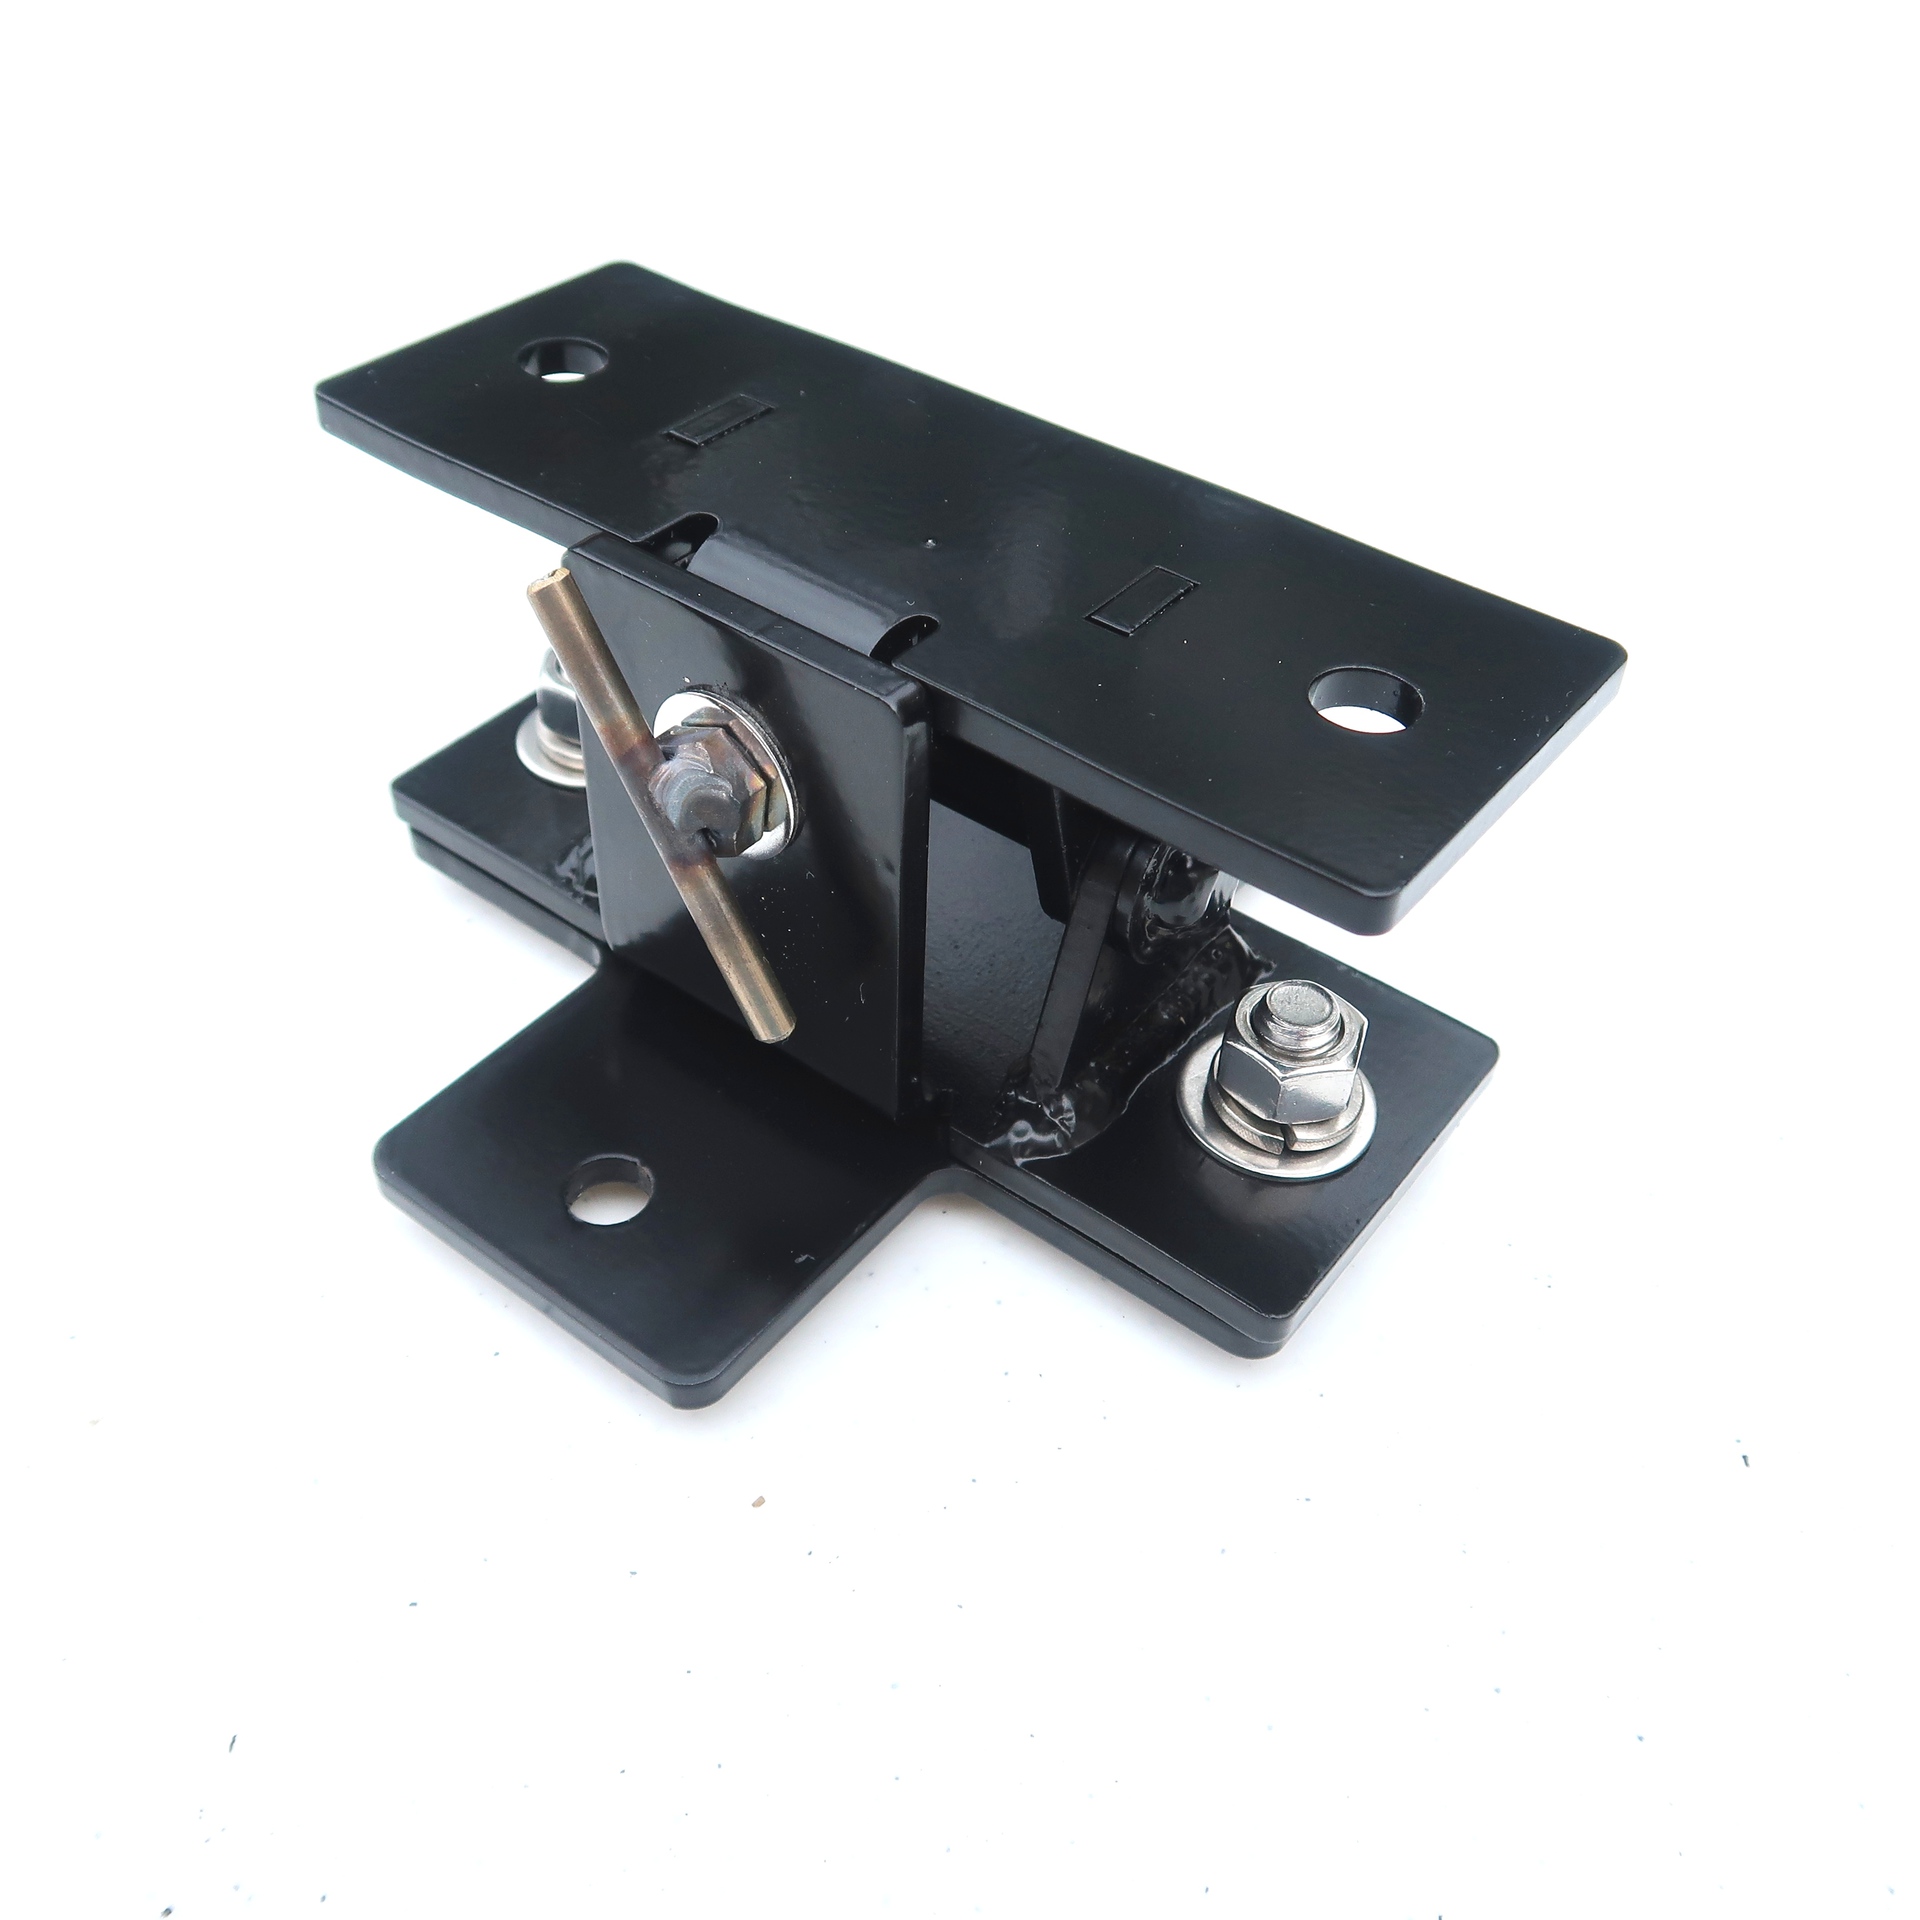 Trailer Hitch Mast Mount Assembley Tilt and Cross fully assembled - Max-Gain Systems, Inc.